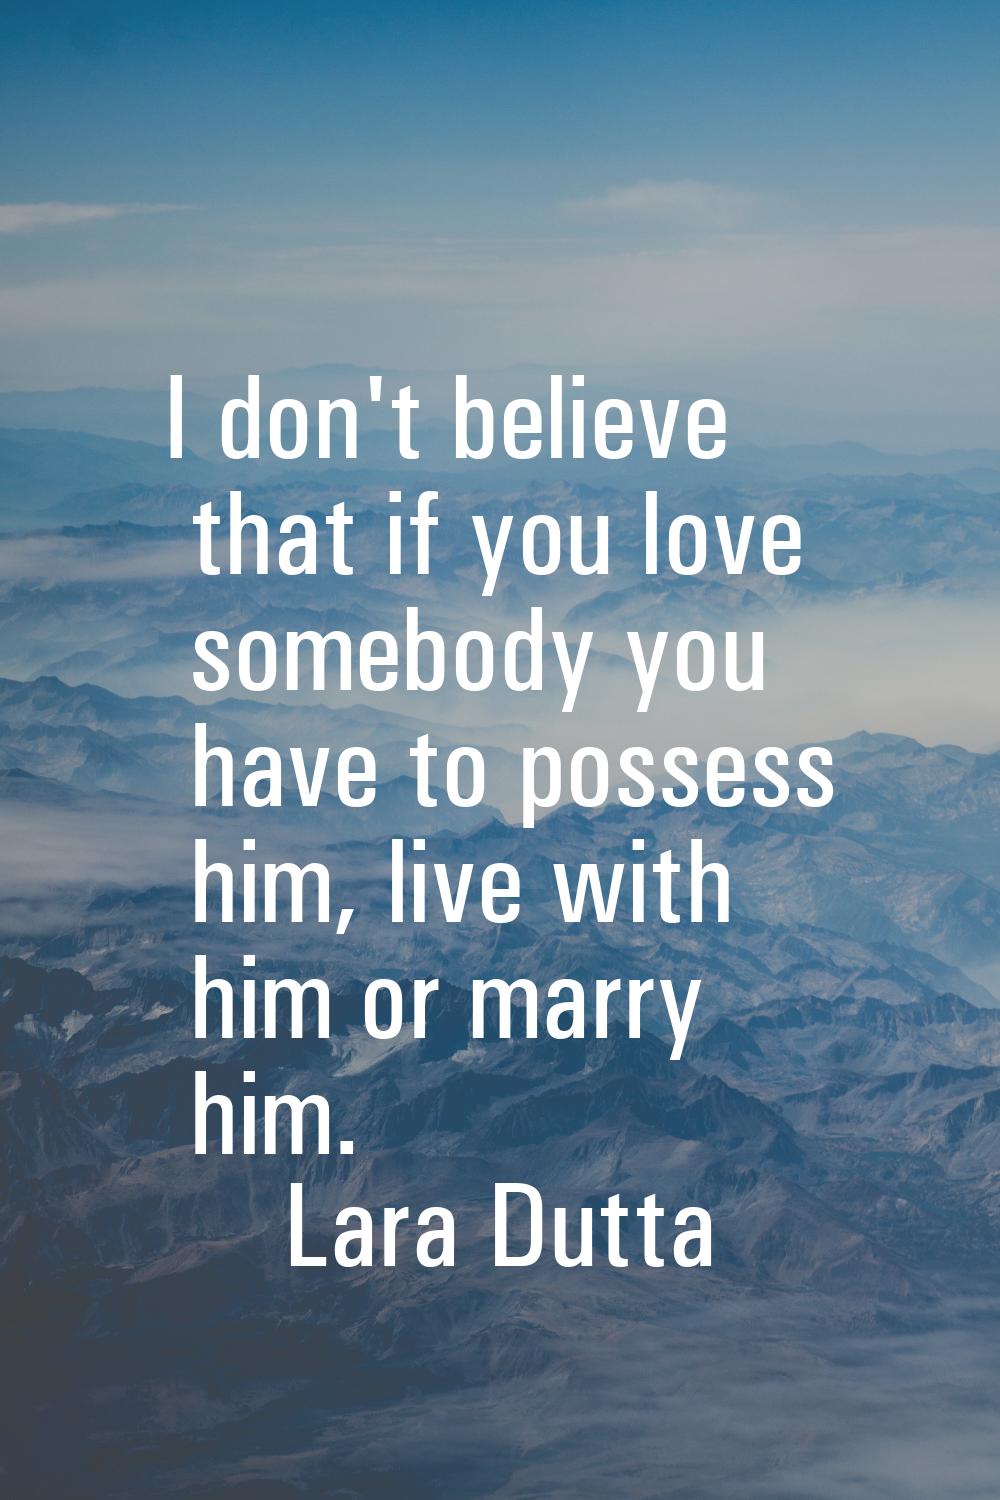 I don't believe that if you love somebody you have to possess him, live with him or marry him.